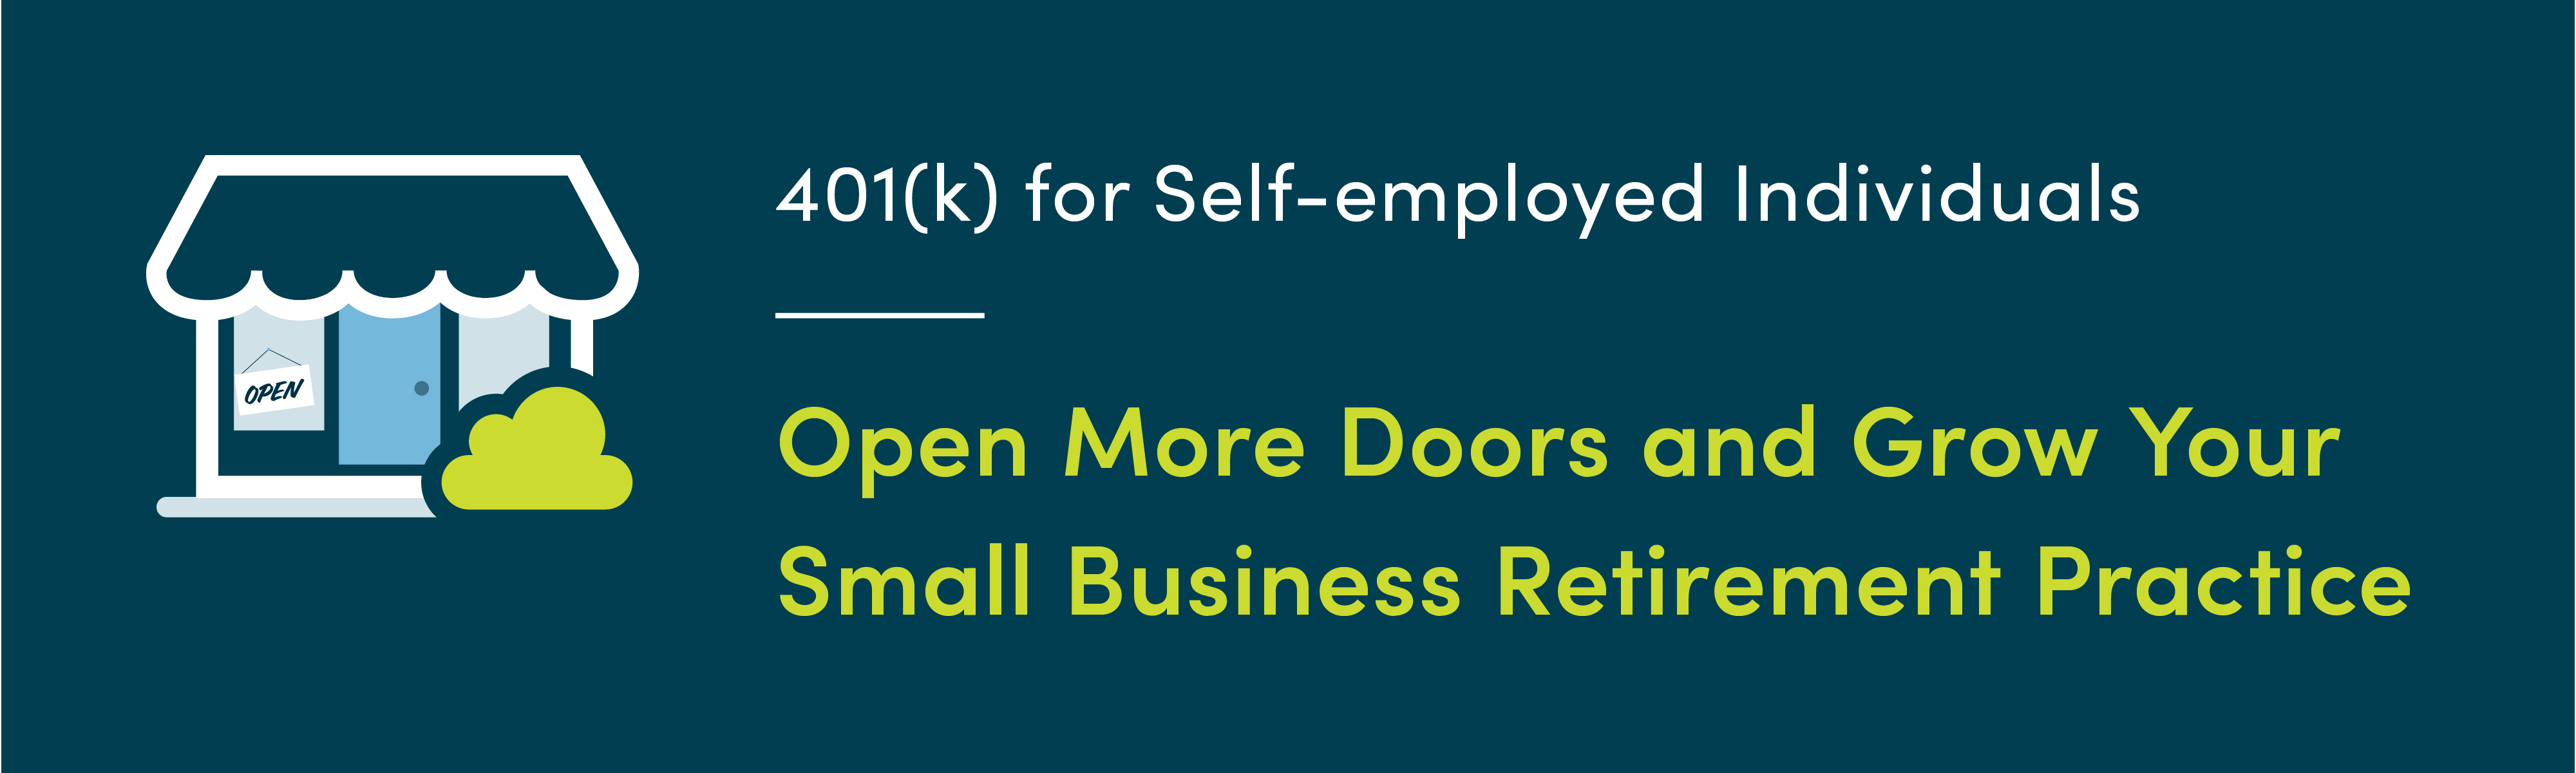 401(k) for self-employed individuals - Open more doors and grow your small business retirement practice